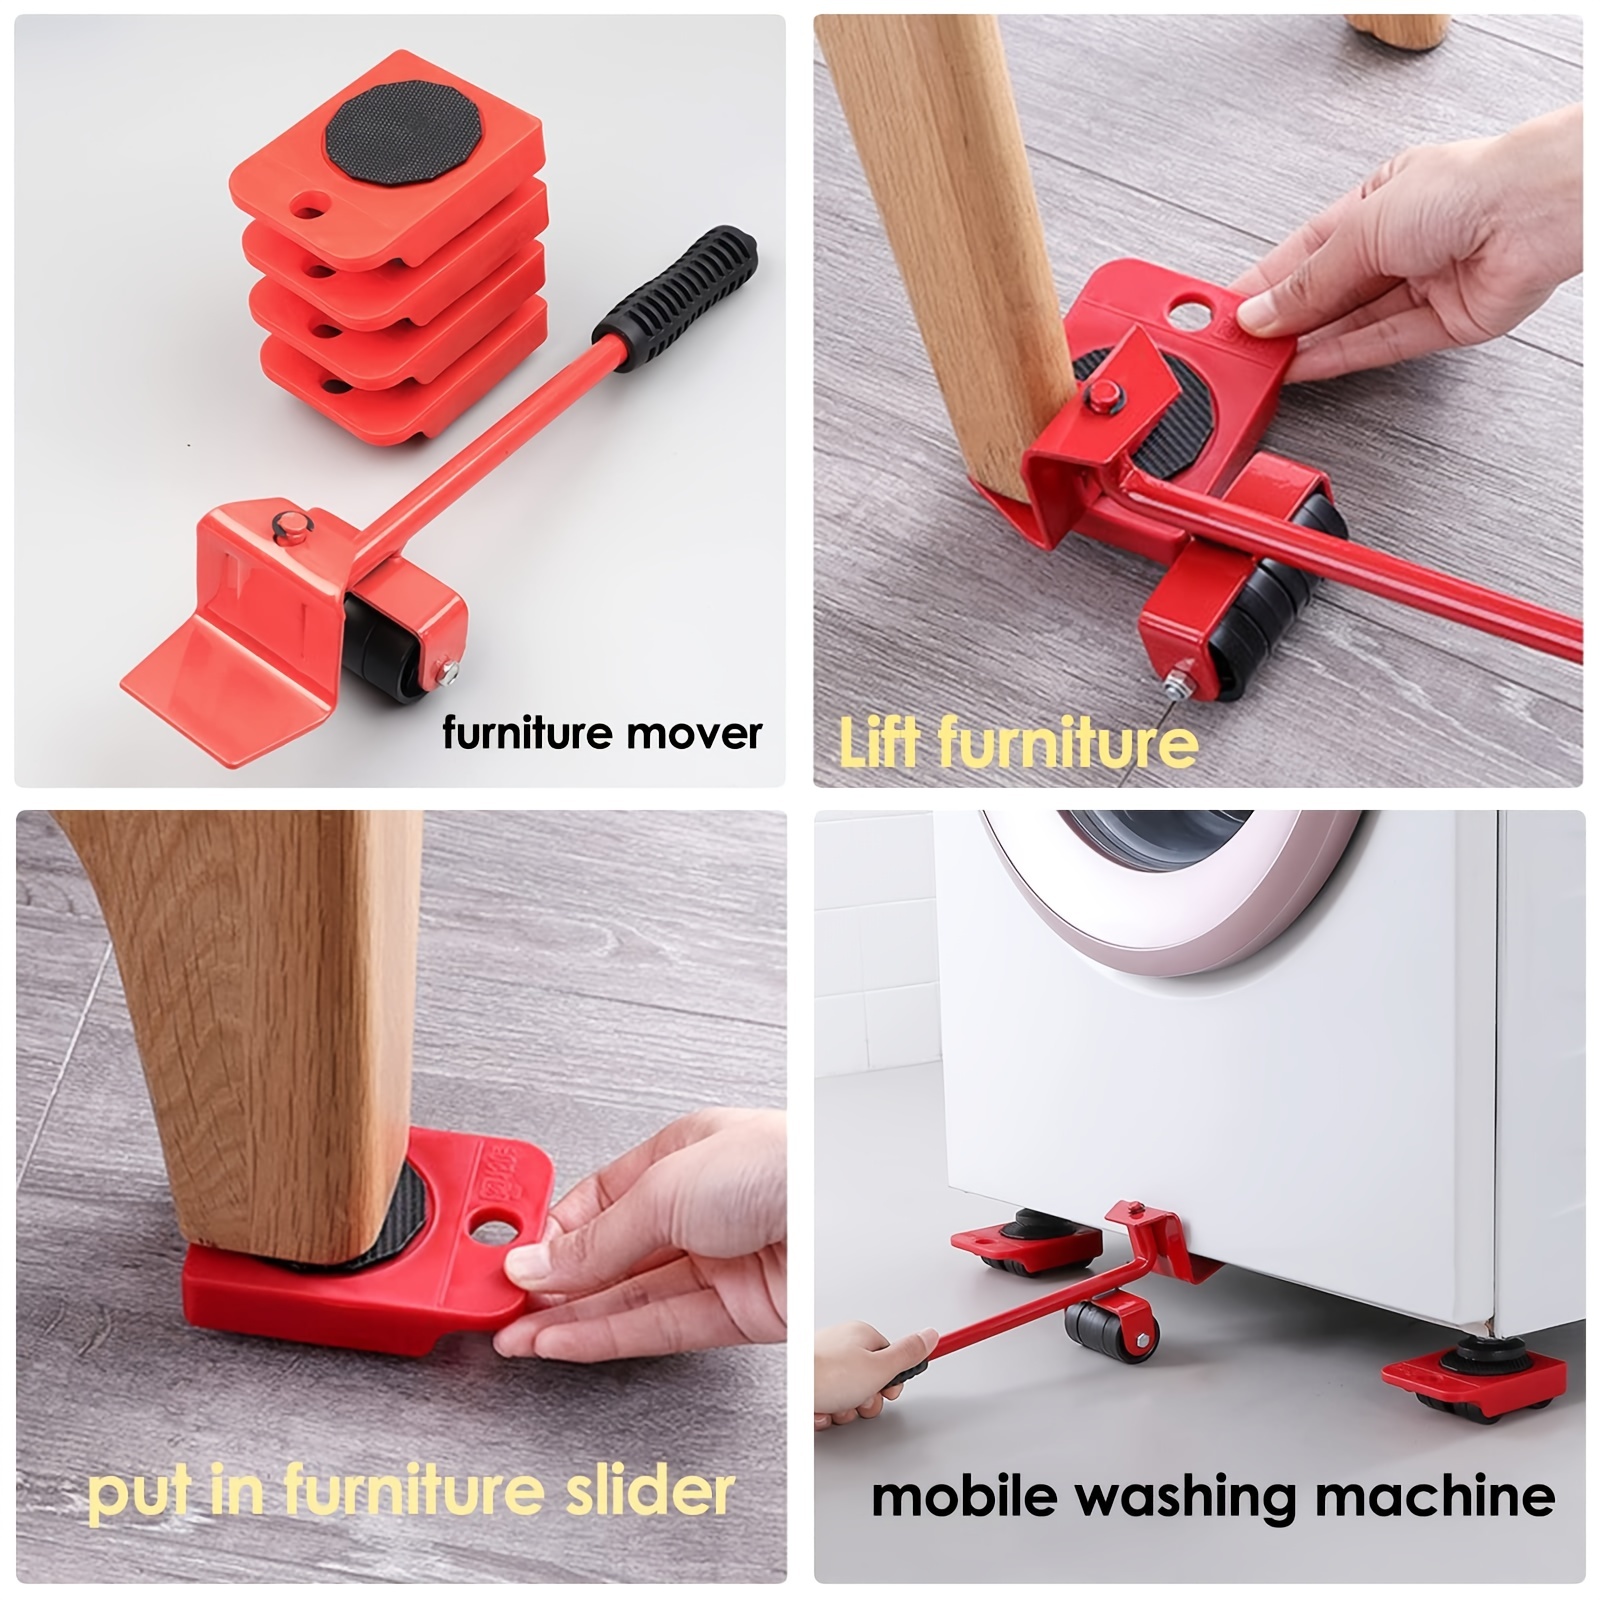 Furniture Lifter Tool Transport Shifter - Heavy Duty Appliance Rollers  Moving Men Furniture Or Refrigerator Sliders for Tile Floors - Appliance  Mover Leverage Tools for Hardwood Floors